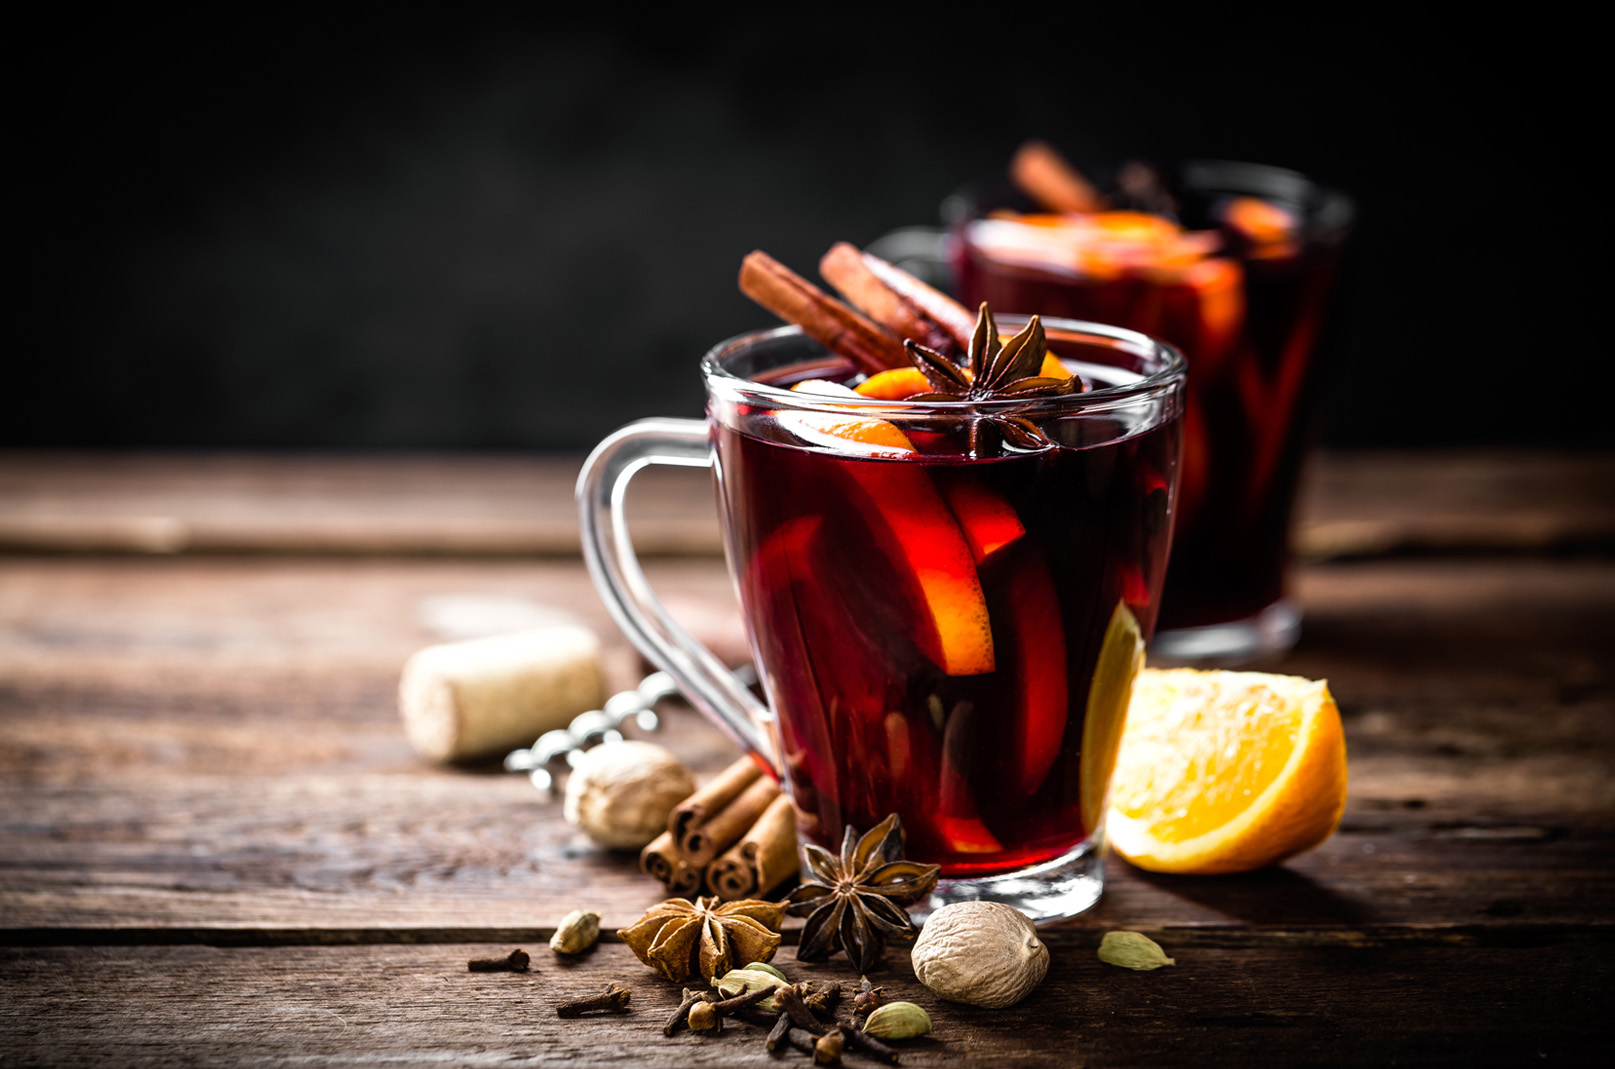 Firevines Products Inc. | Premium BC Mulled Wine